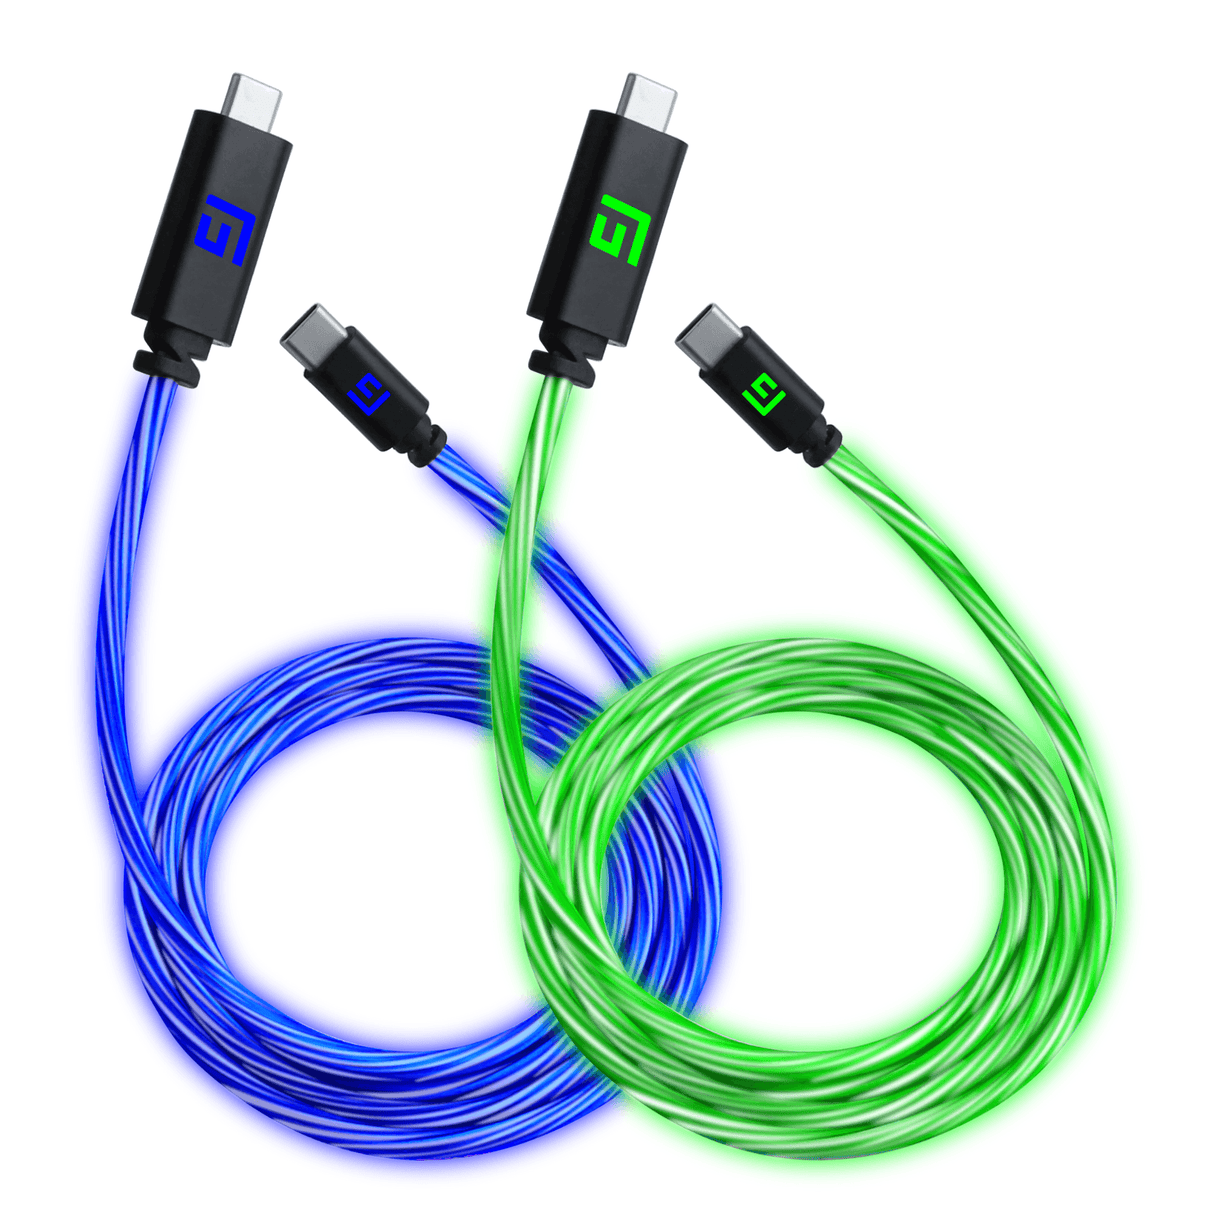 1,5M/5ft LED USB-C/USB-C Cable | High-Speed Charging + Sync (2 Pack) - FLOATING GRIP